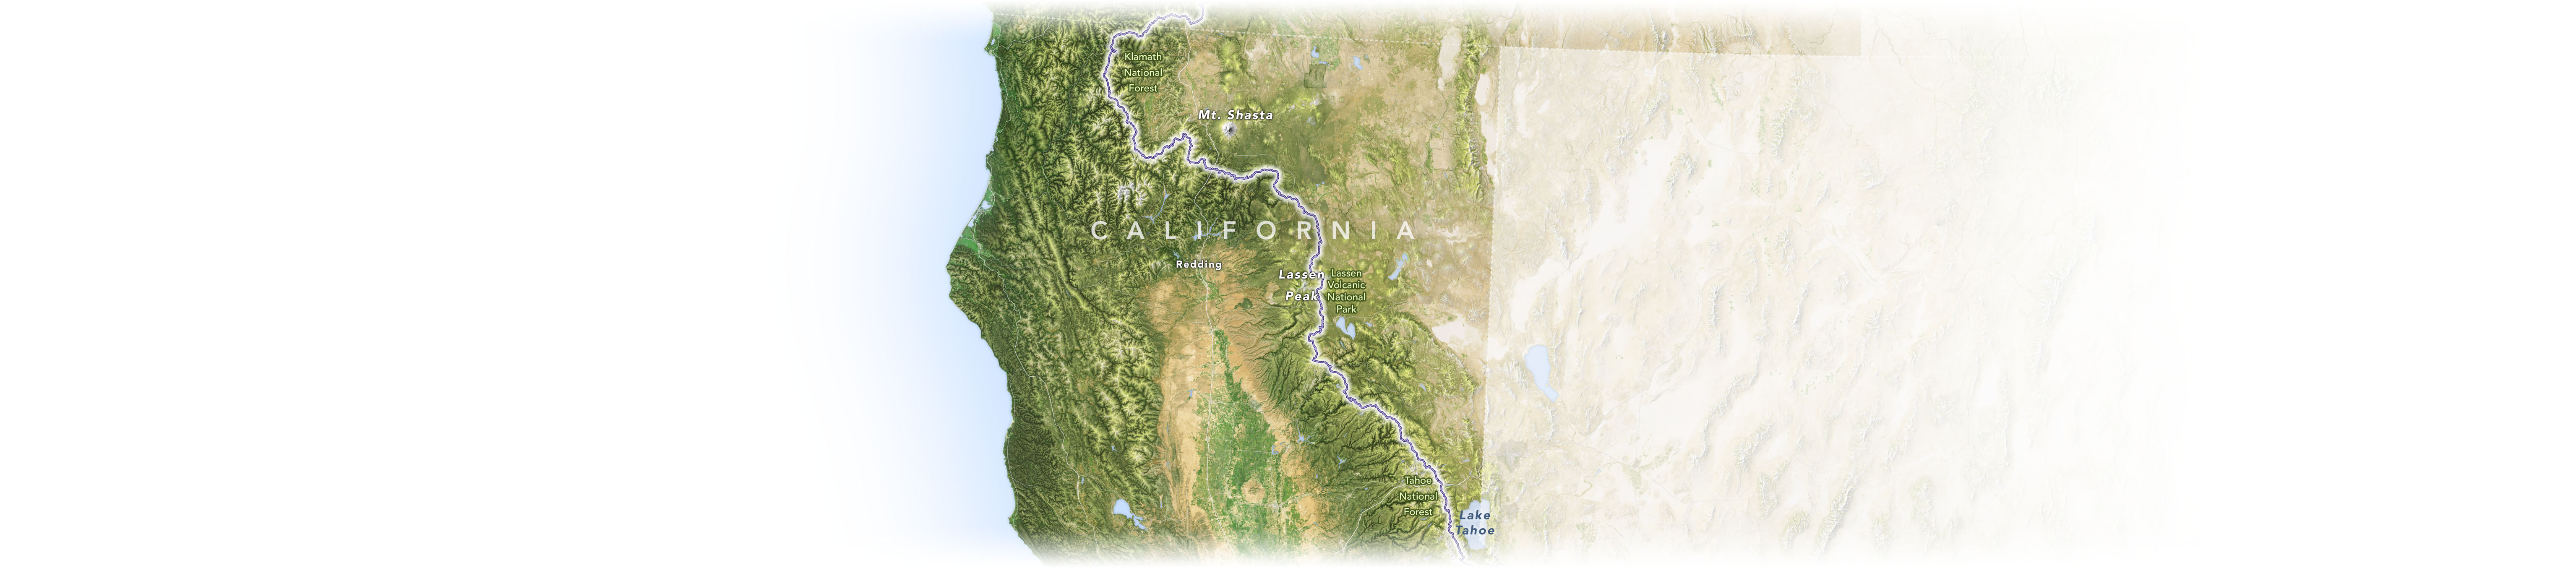 A map of the Pacific Crest Trail and nearby landmarks in northern California.